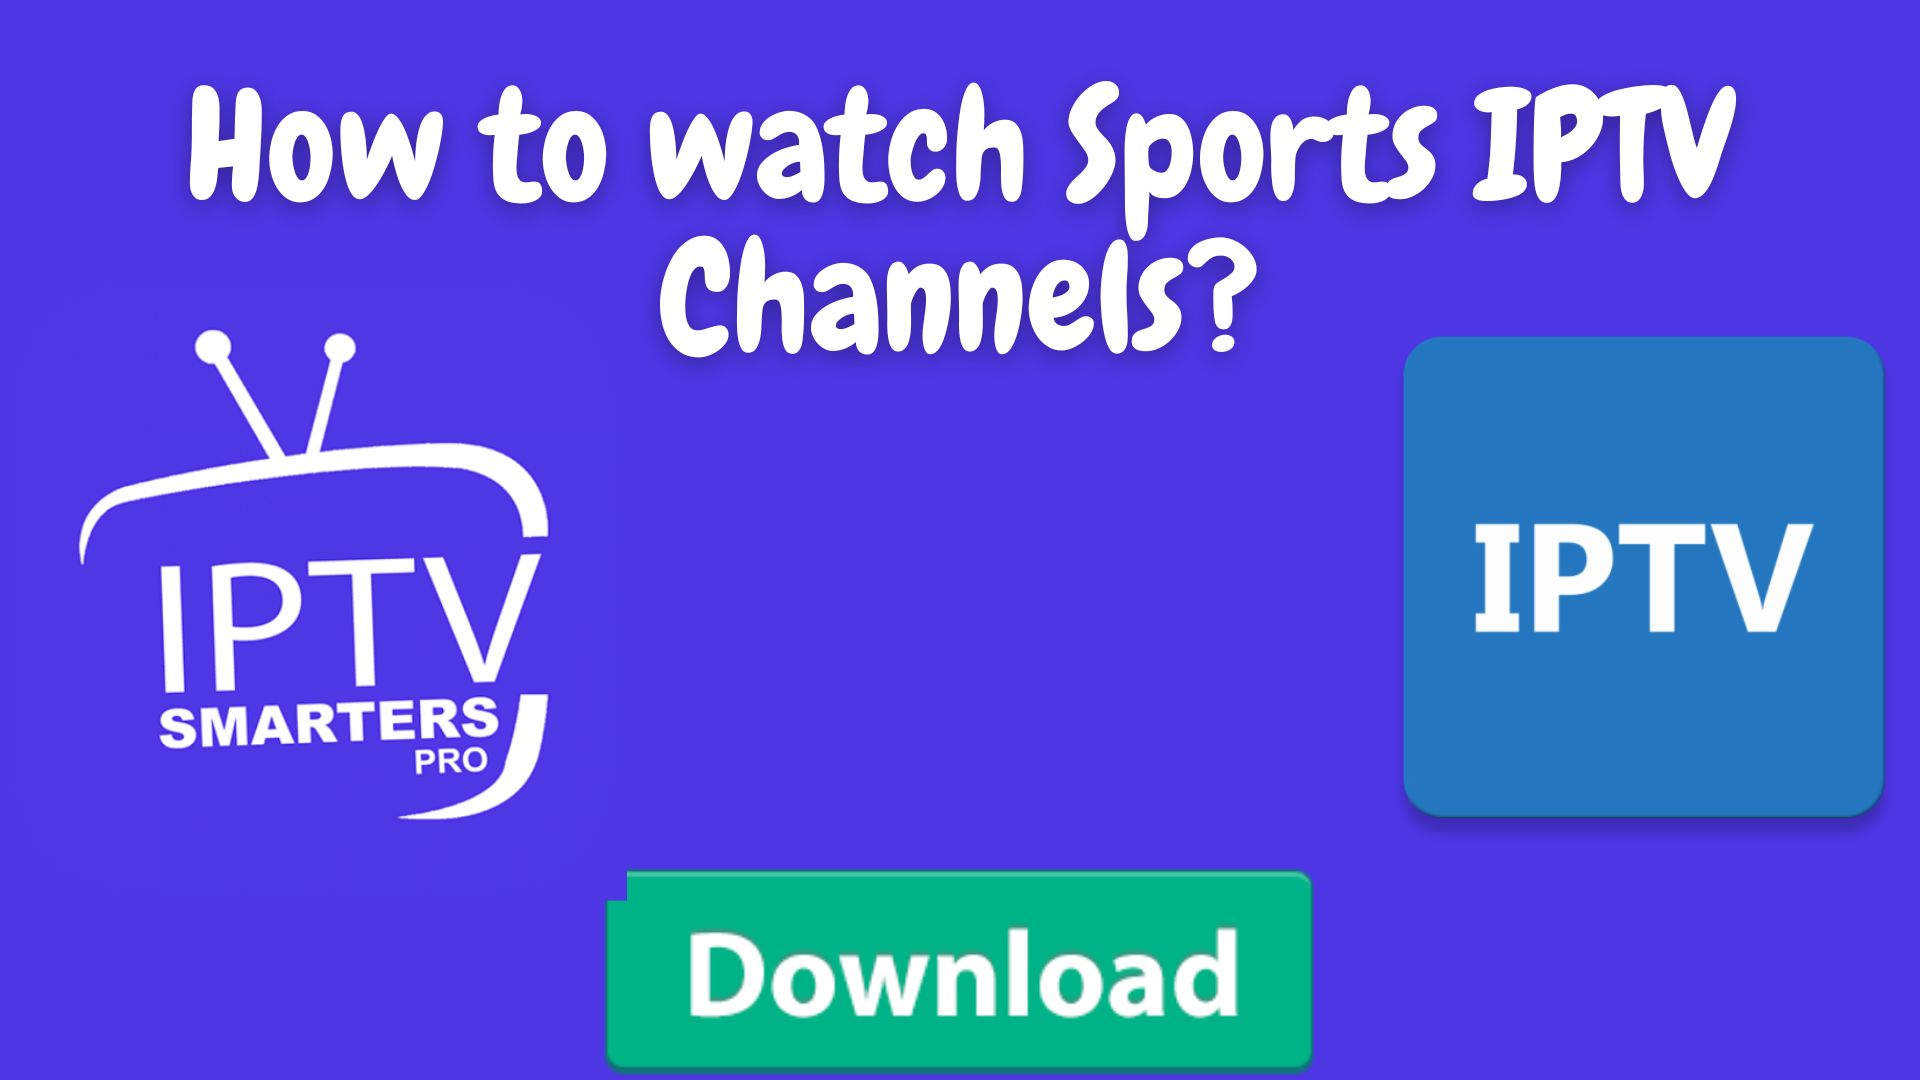 How To Watch Sports Iptv Channels?